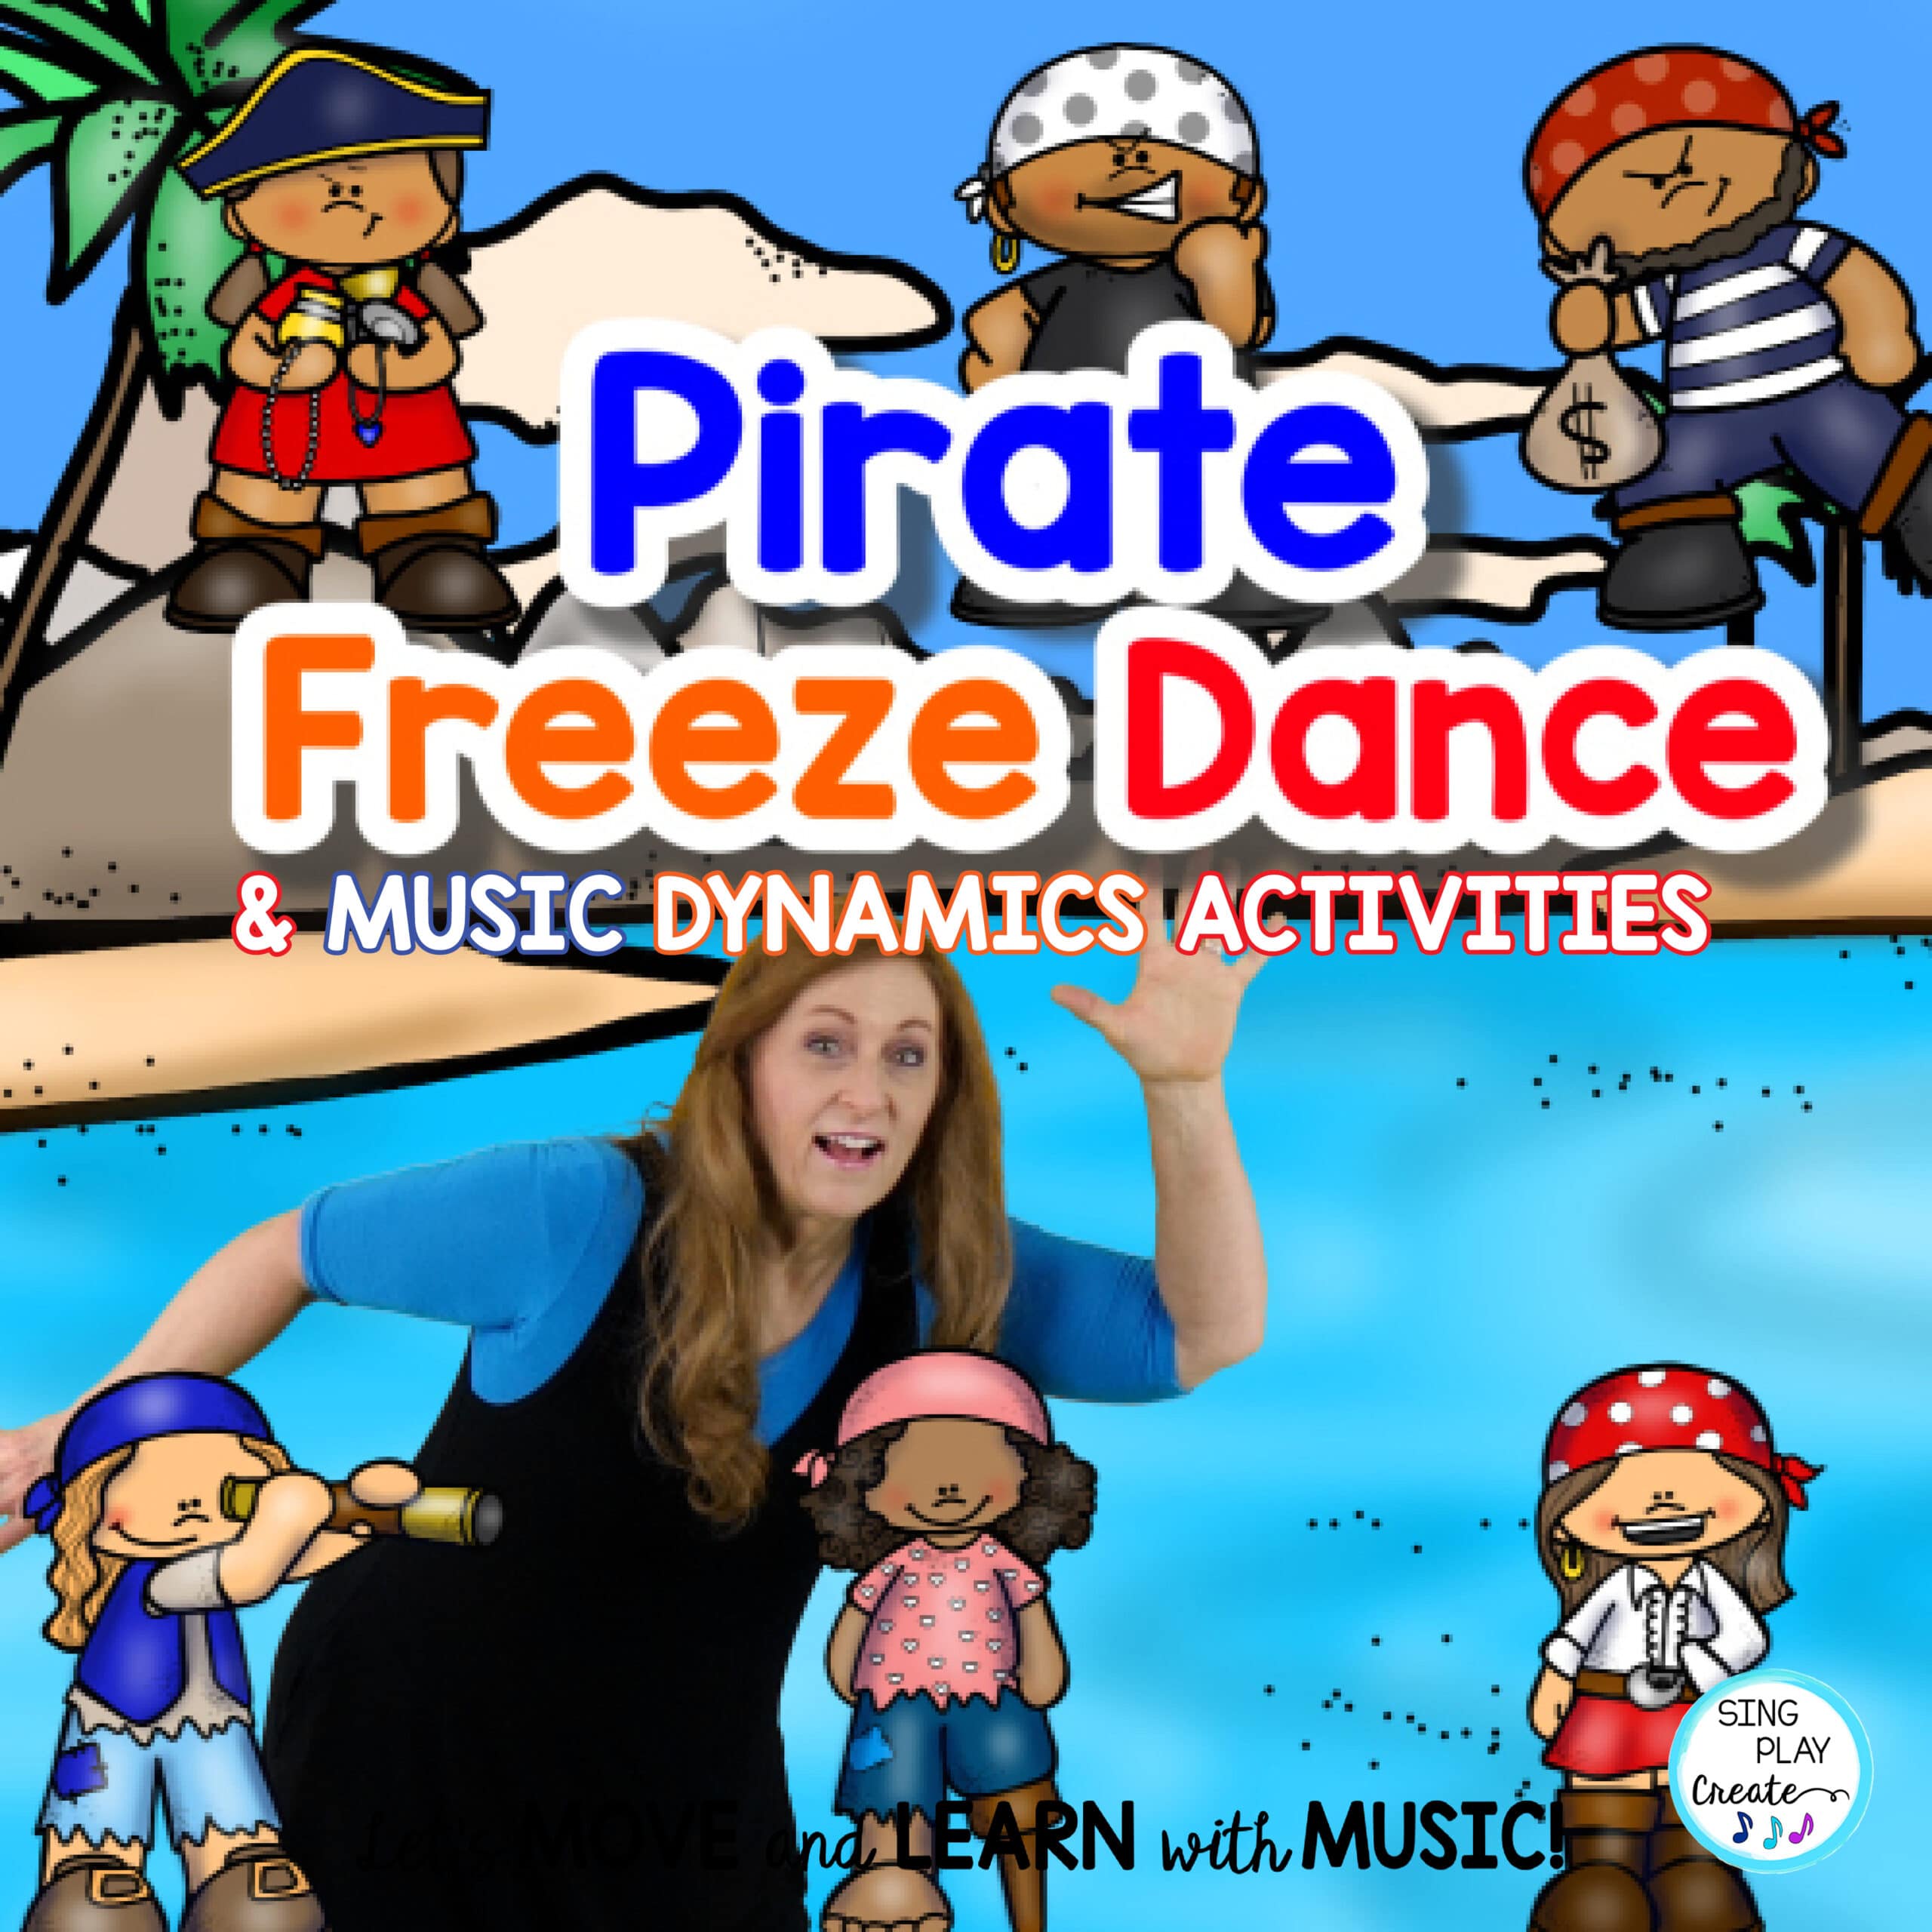 Create　Dance:　Math　Dynamics,　and　Movement　Activites　Sing　Play　Pirate　Freeze